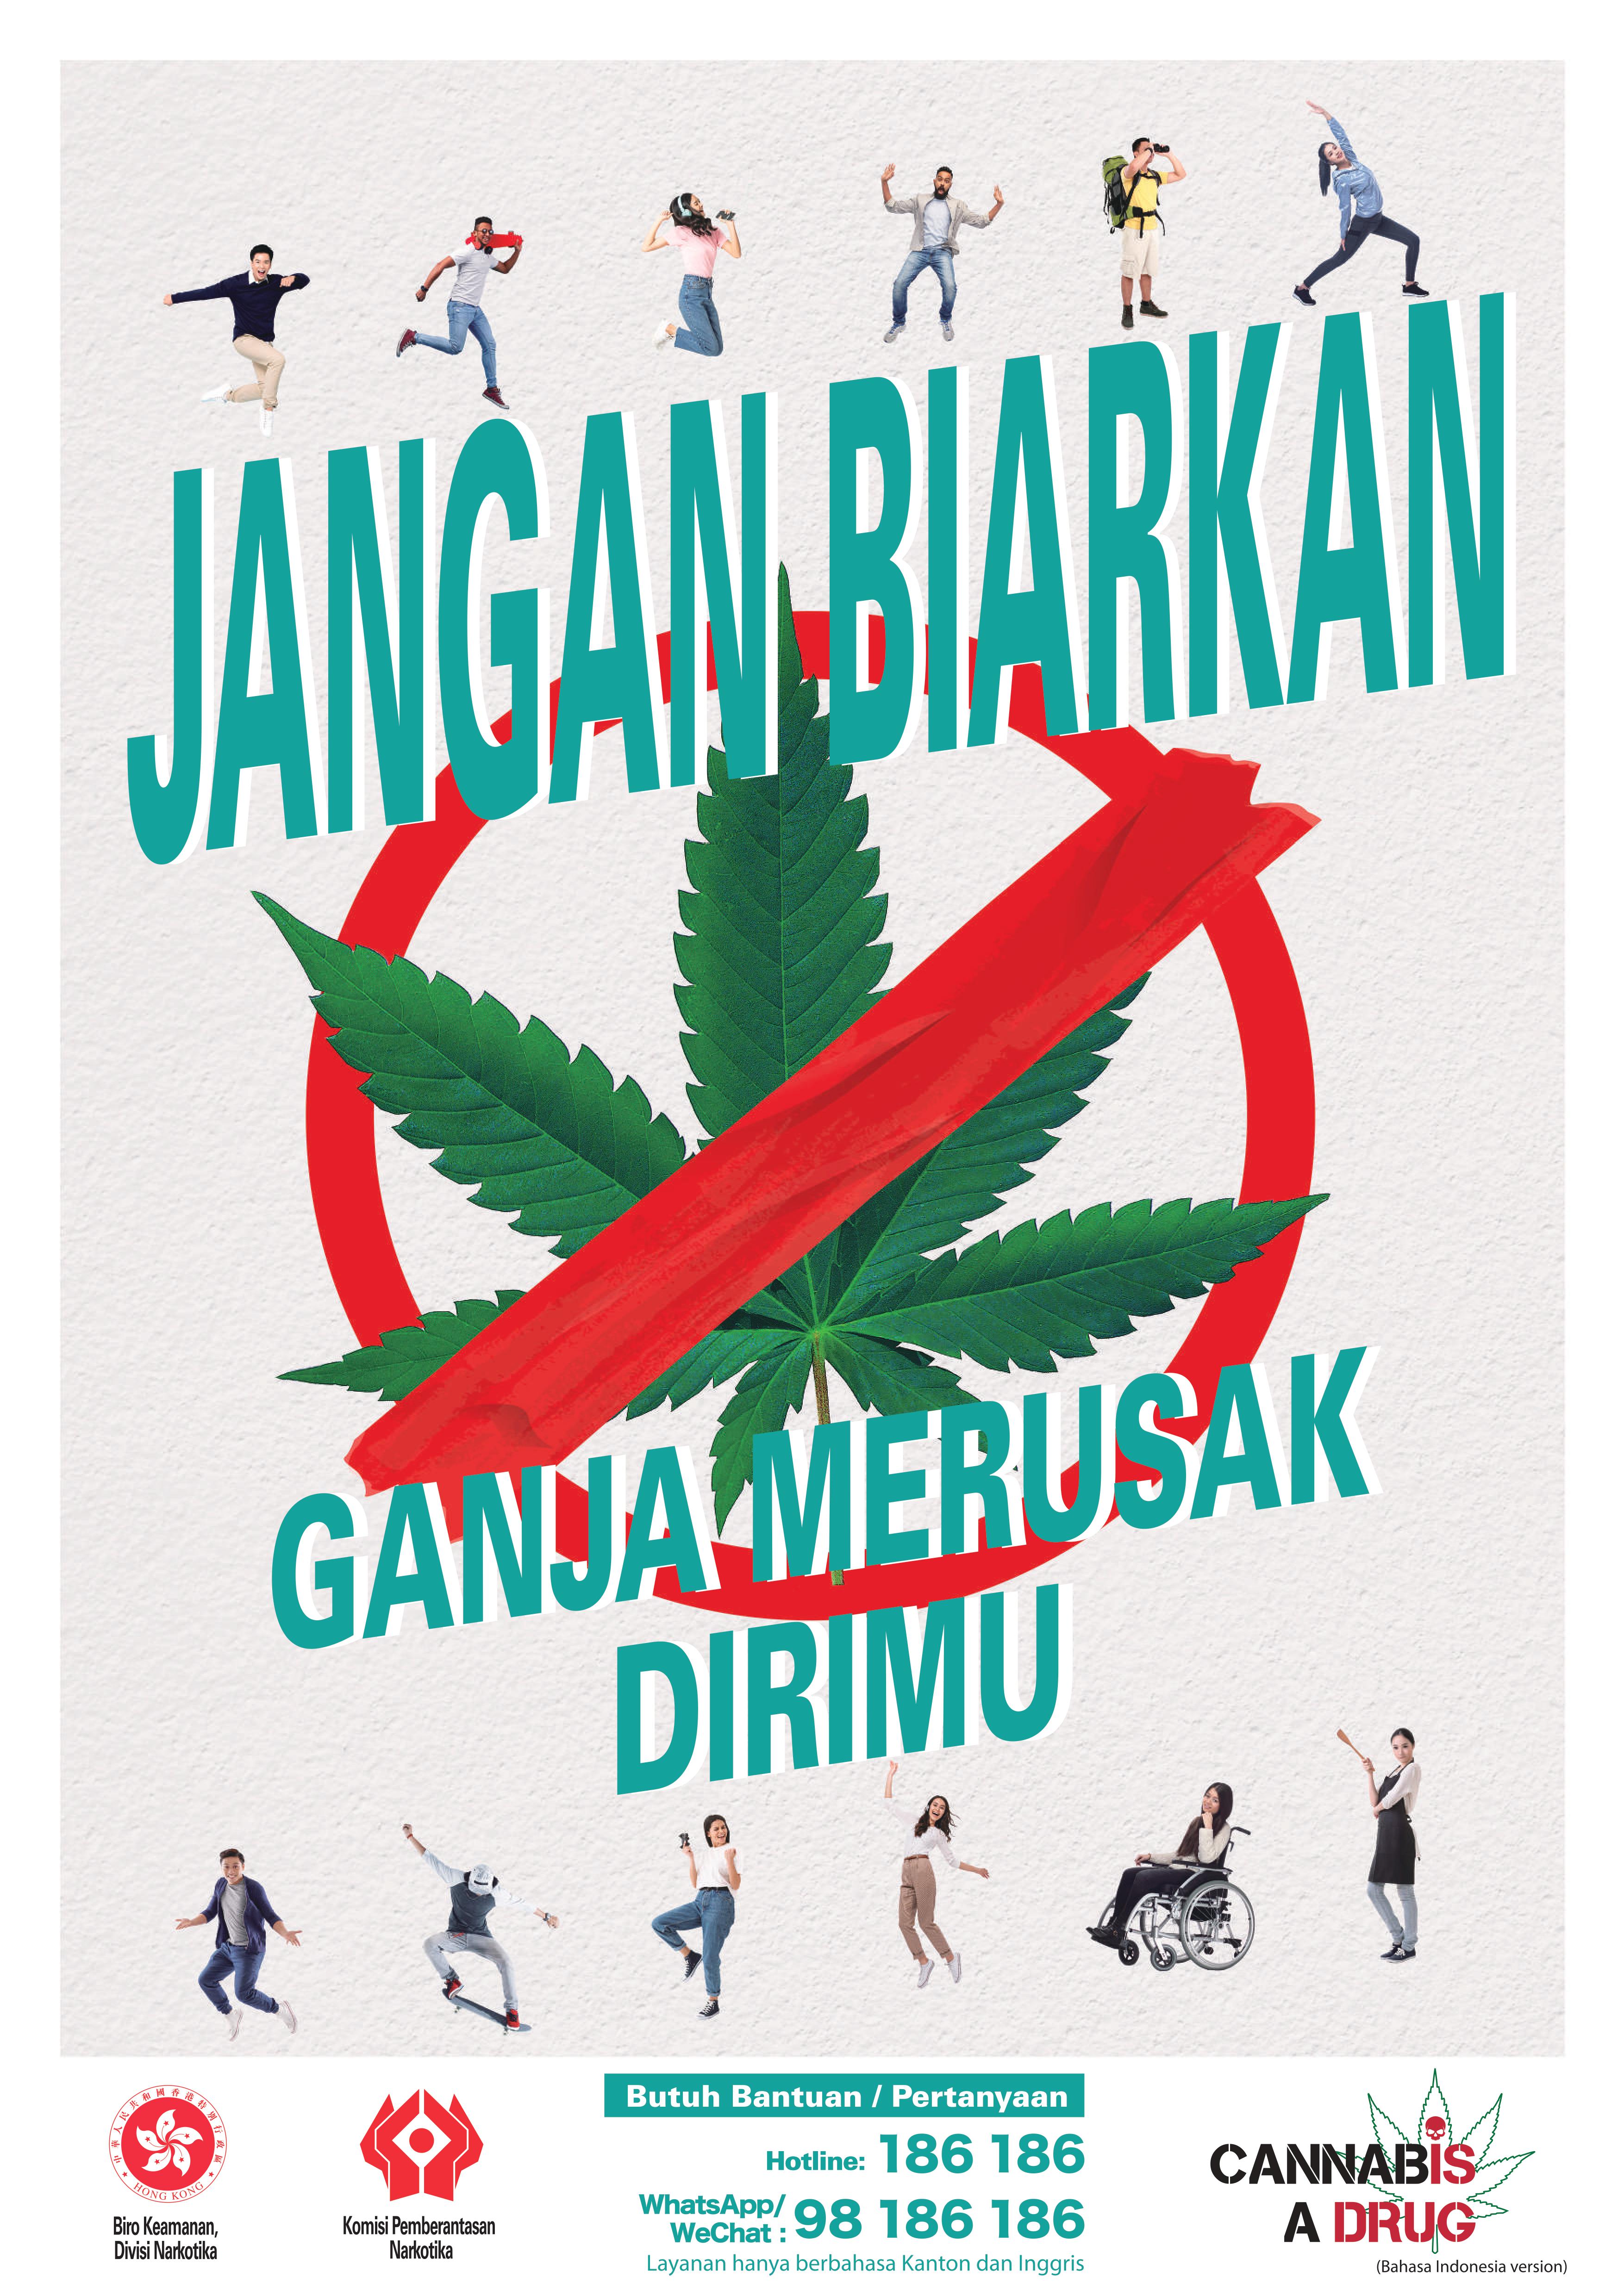 Anti-drug poster "Dont let cannabis ruin you" - Bahasa Indonesia version